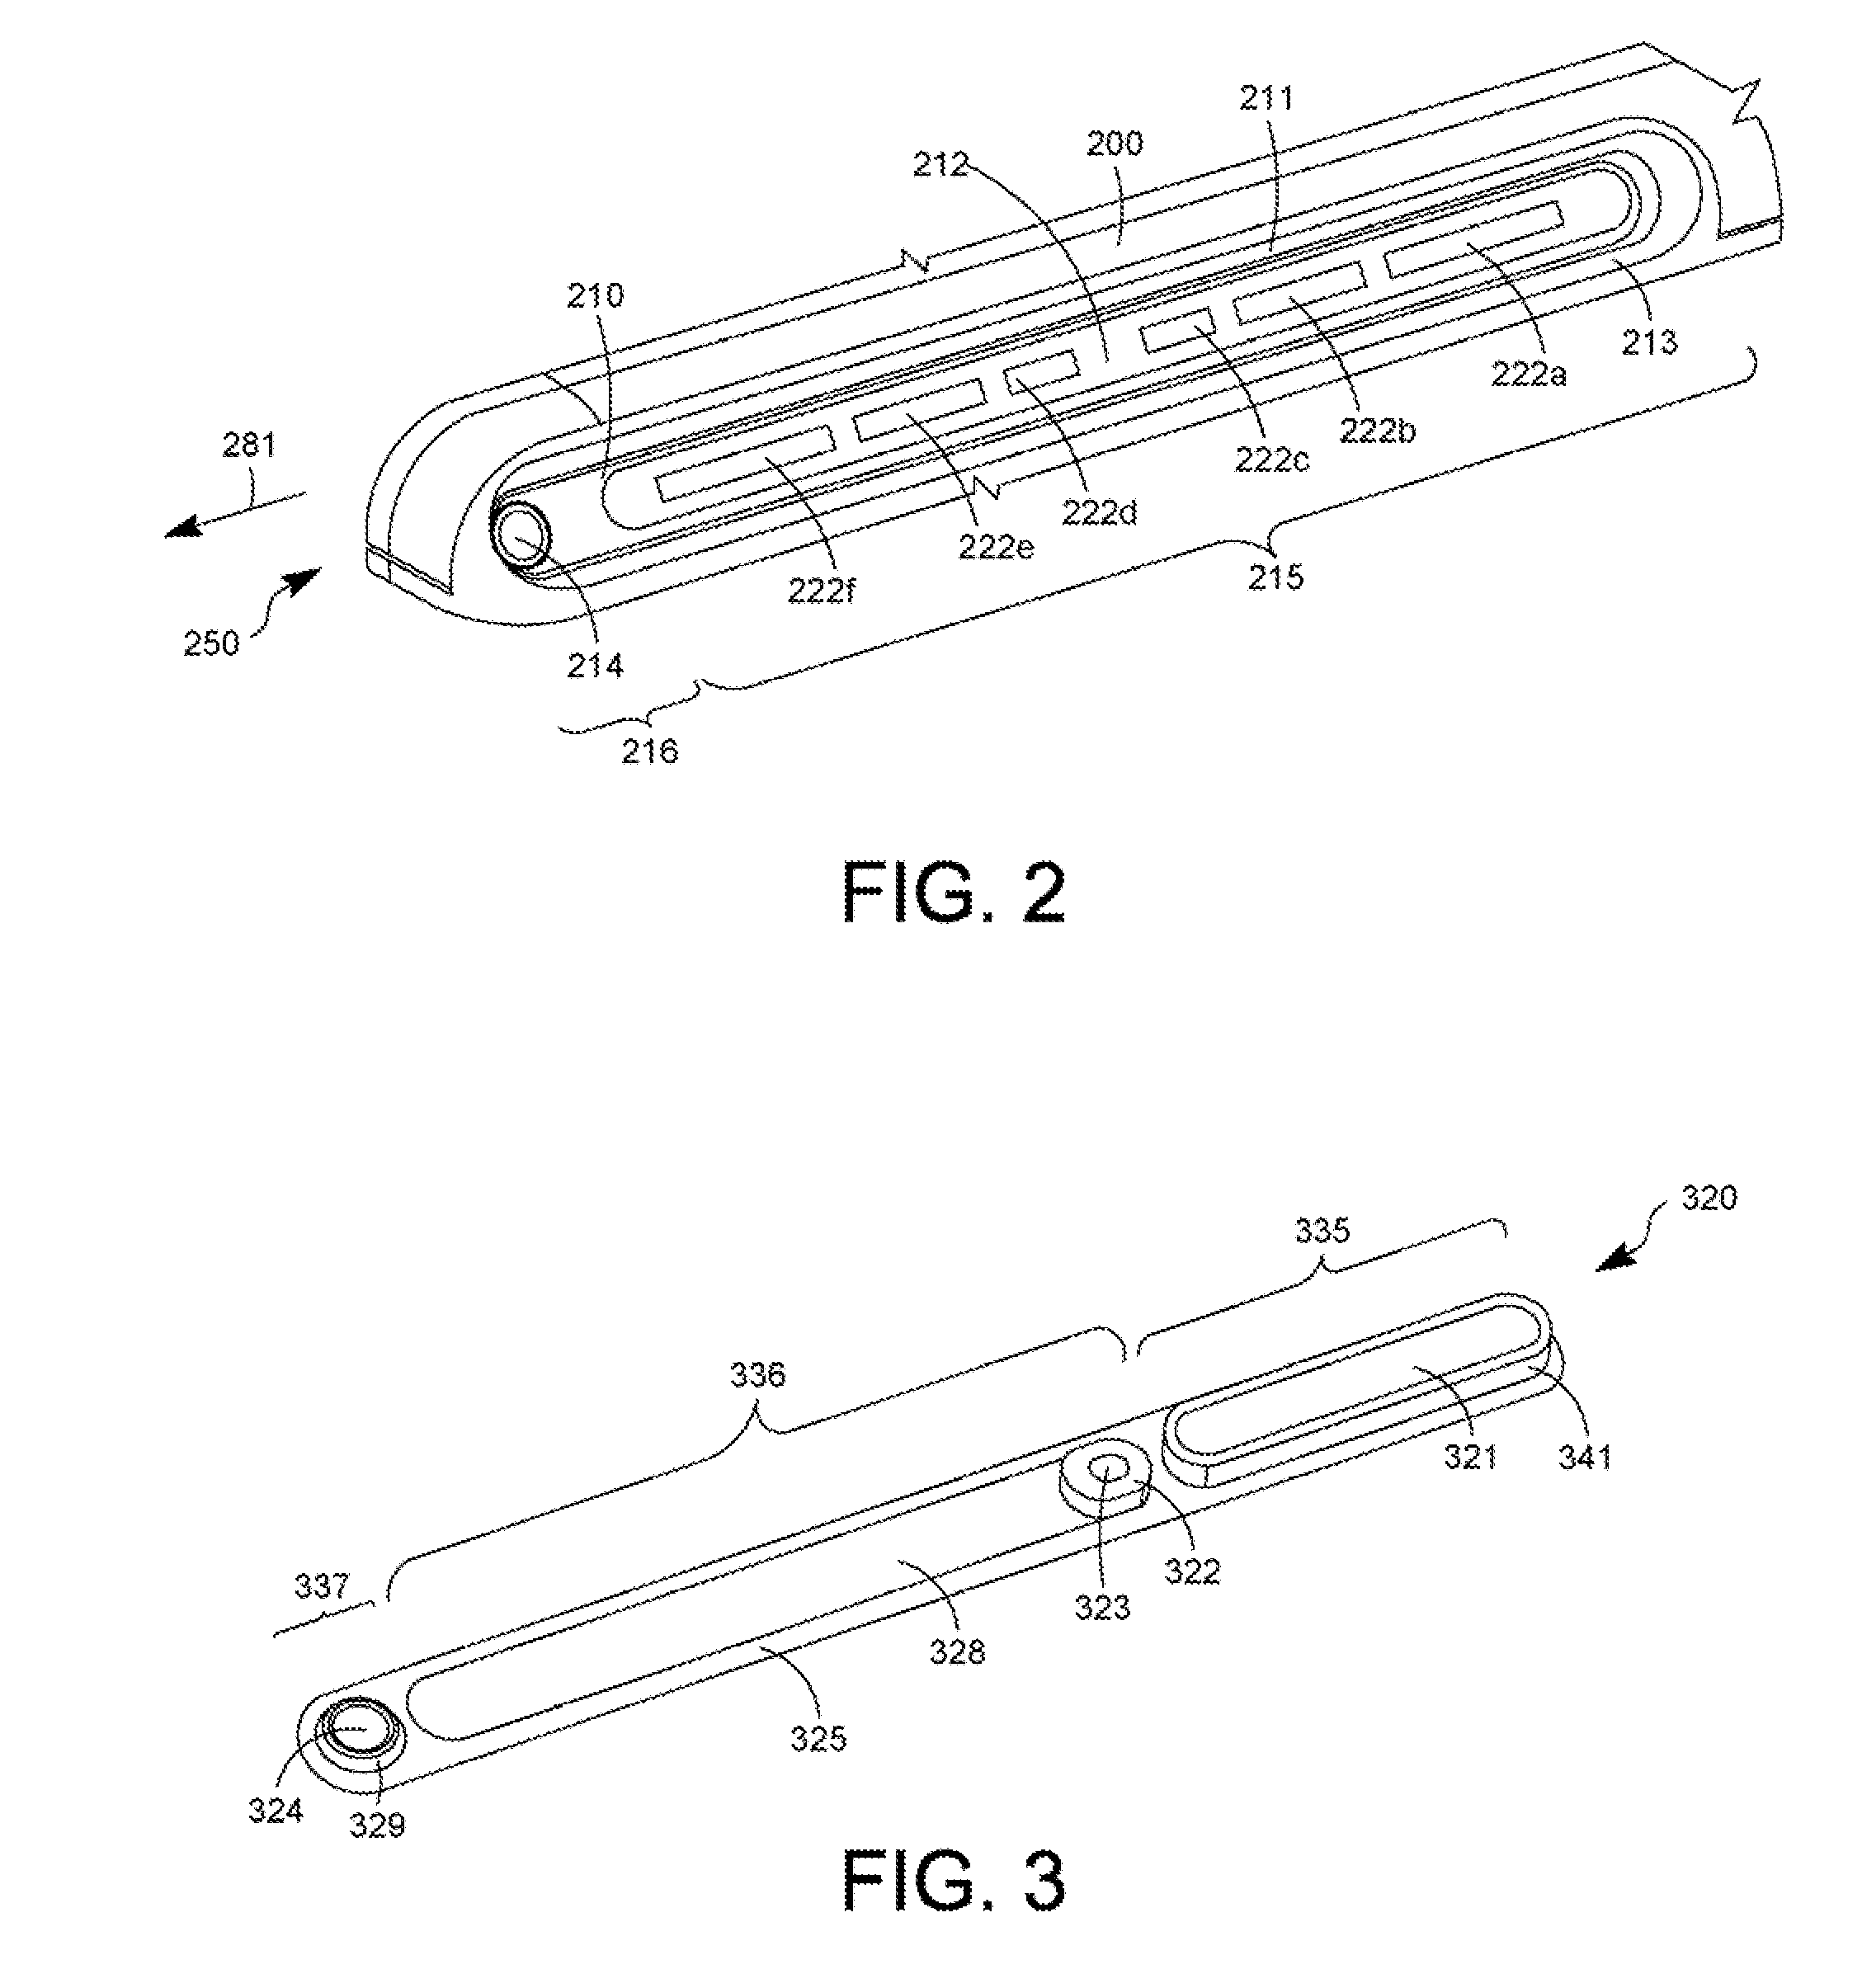 Antenna-carrying assembly